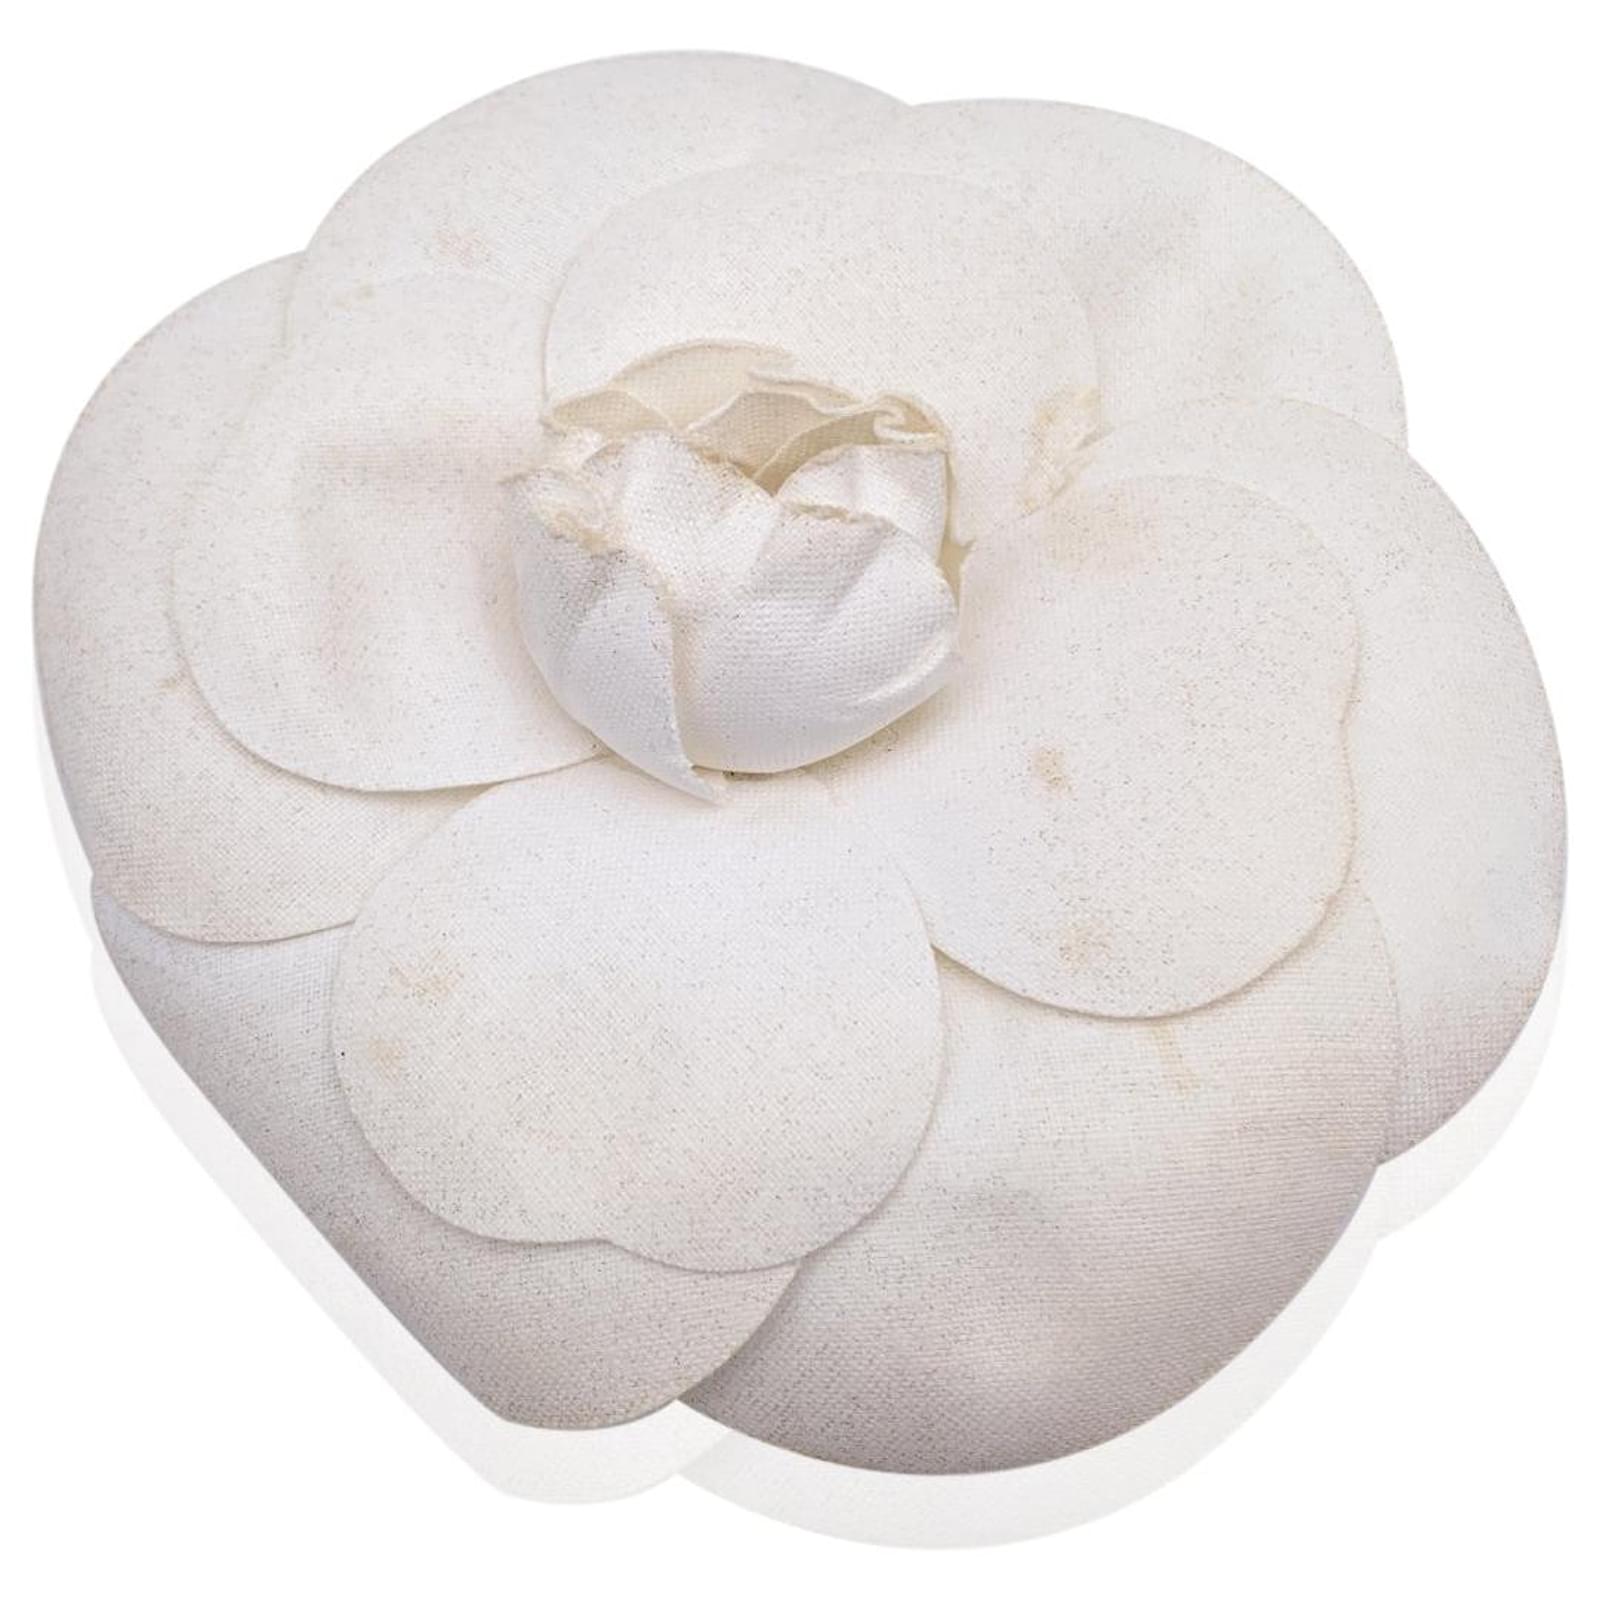 Chanel, A Camellia Flower Brooch, Composed Of Ivory Toned Fabric